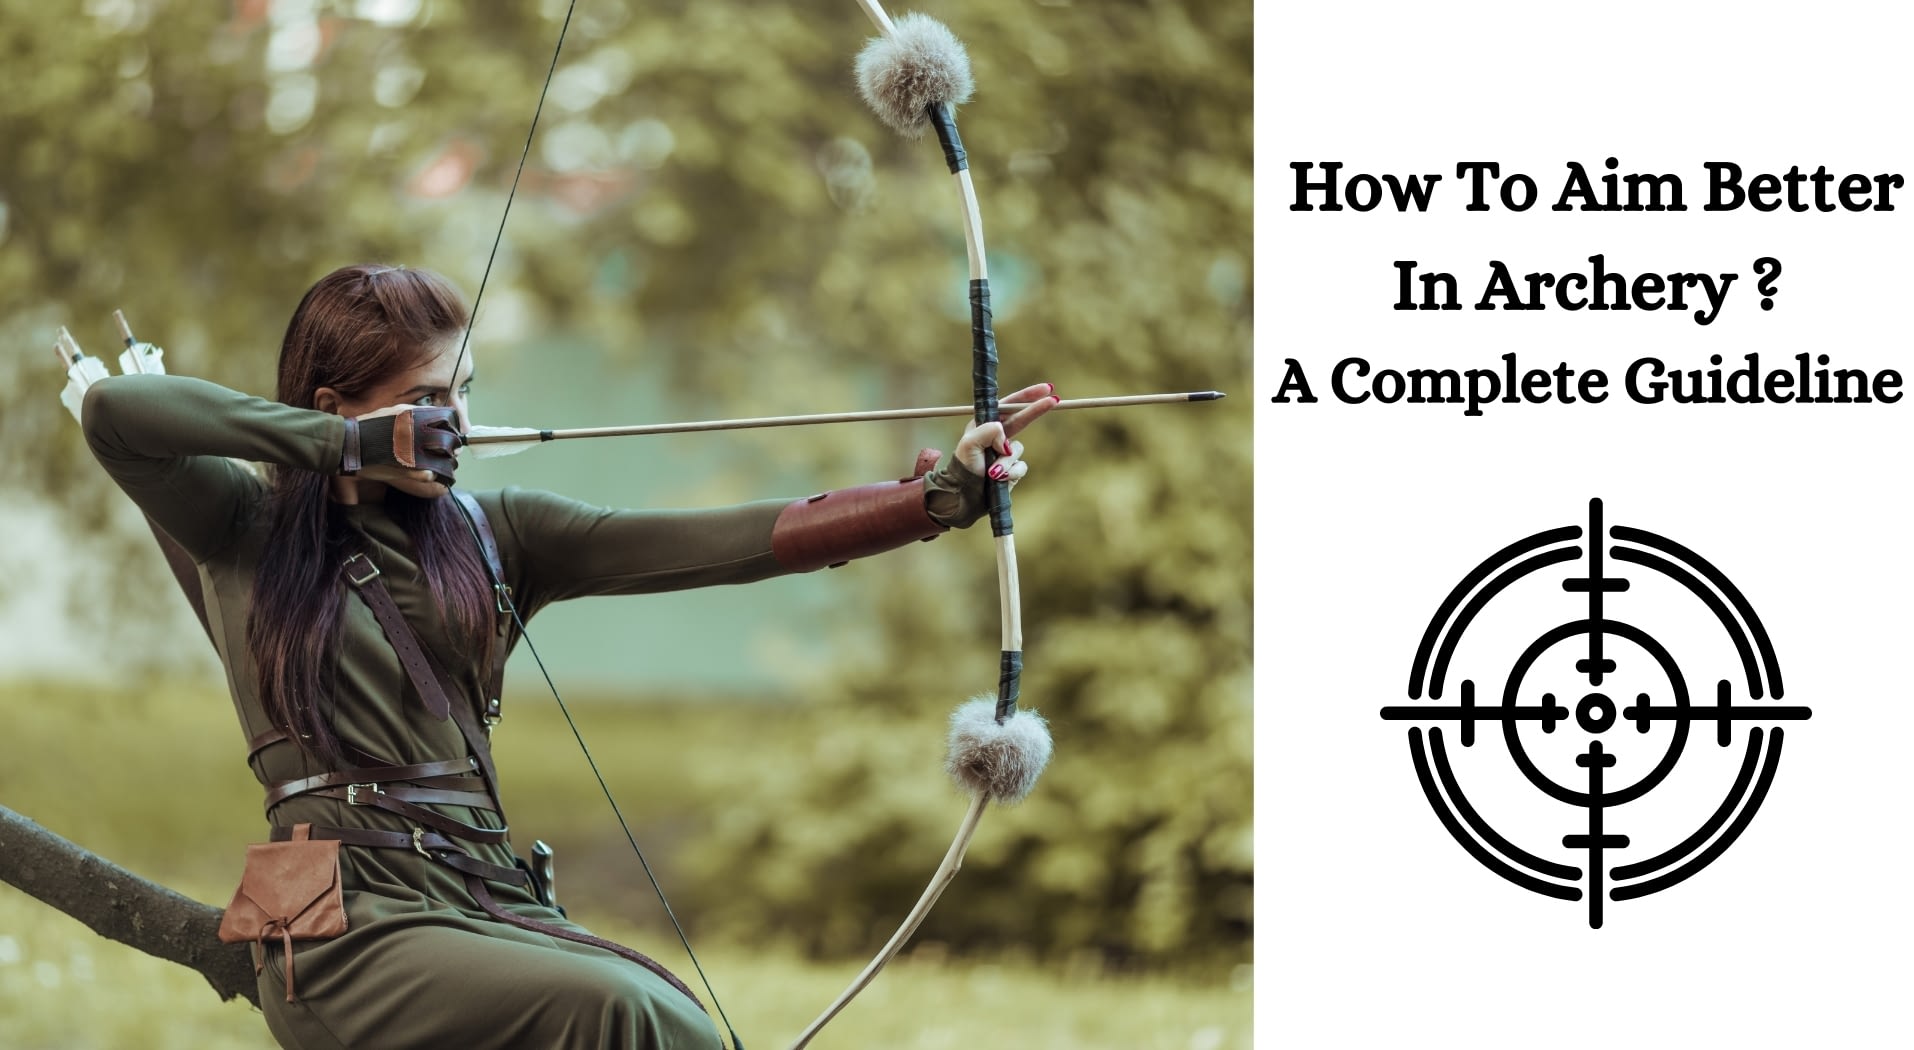 How To Aim Better In Archery? A Complete Guideline